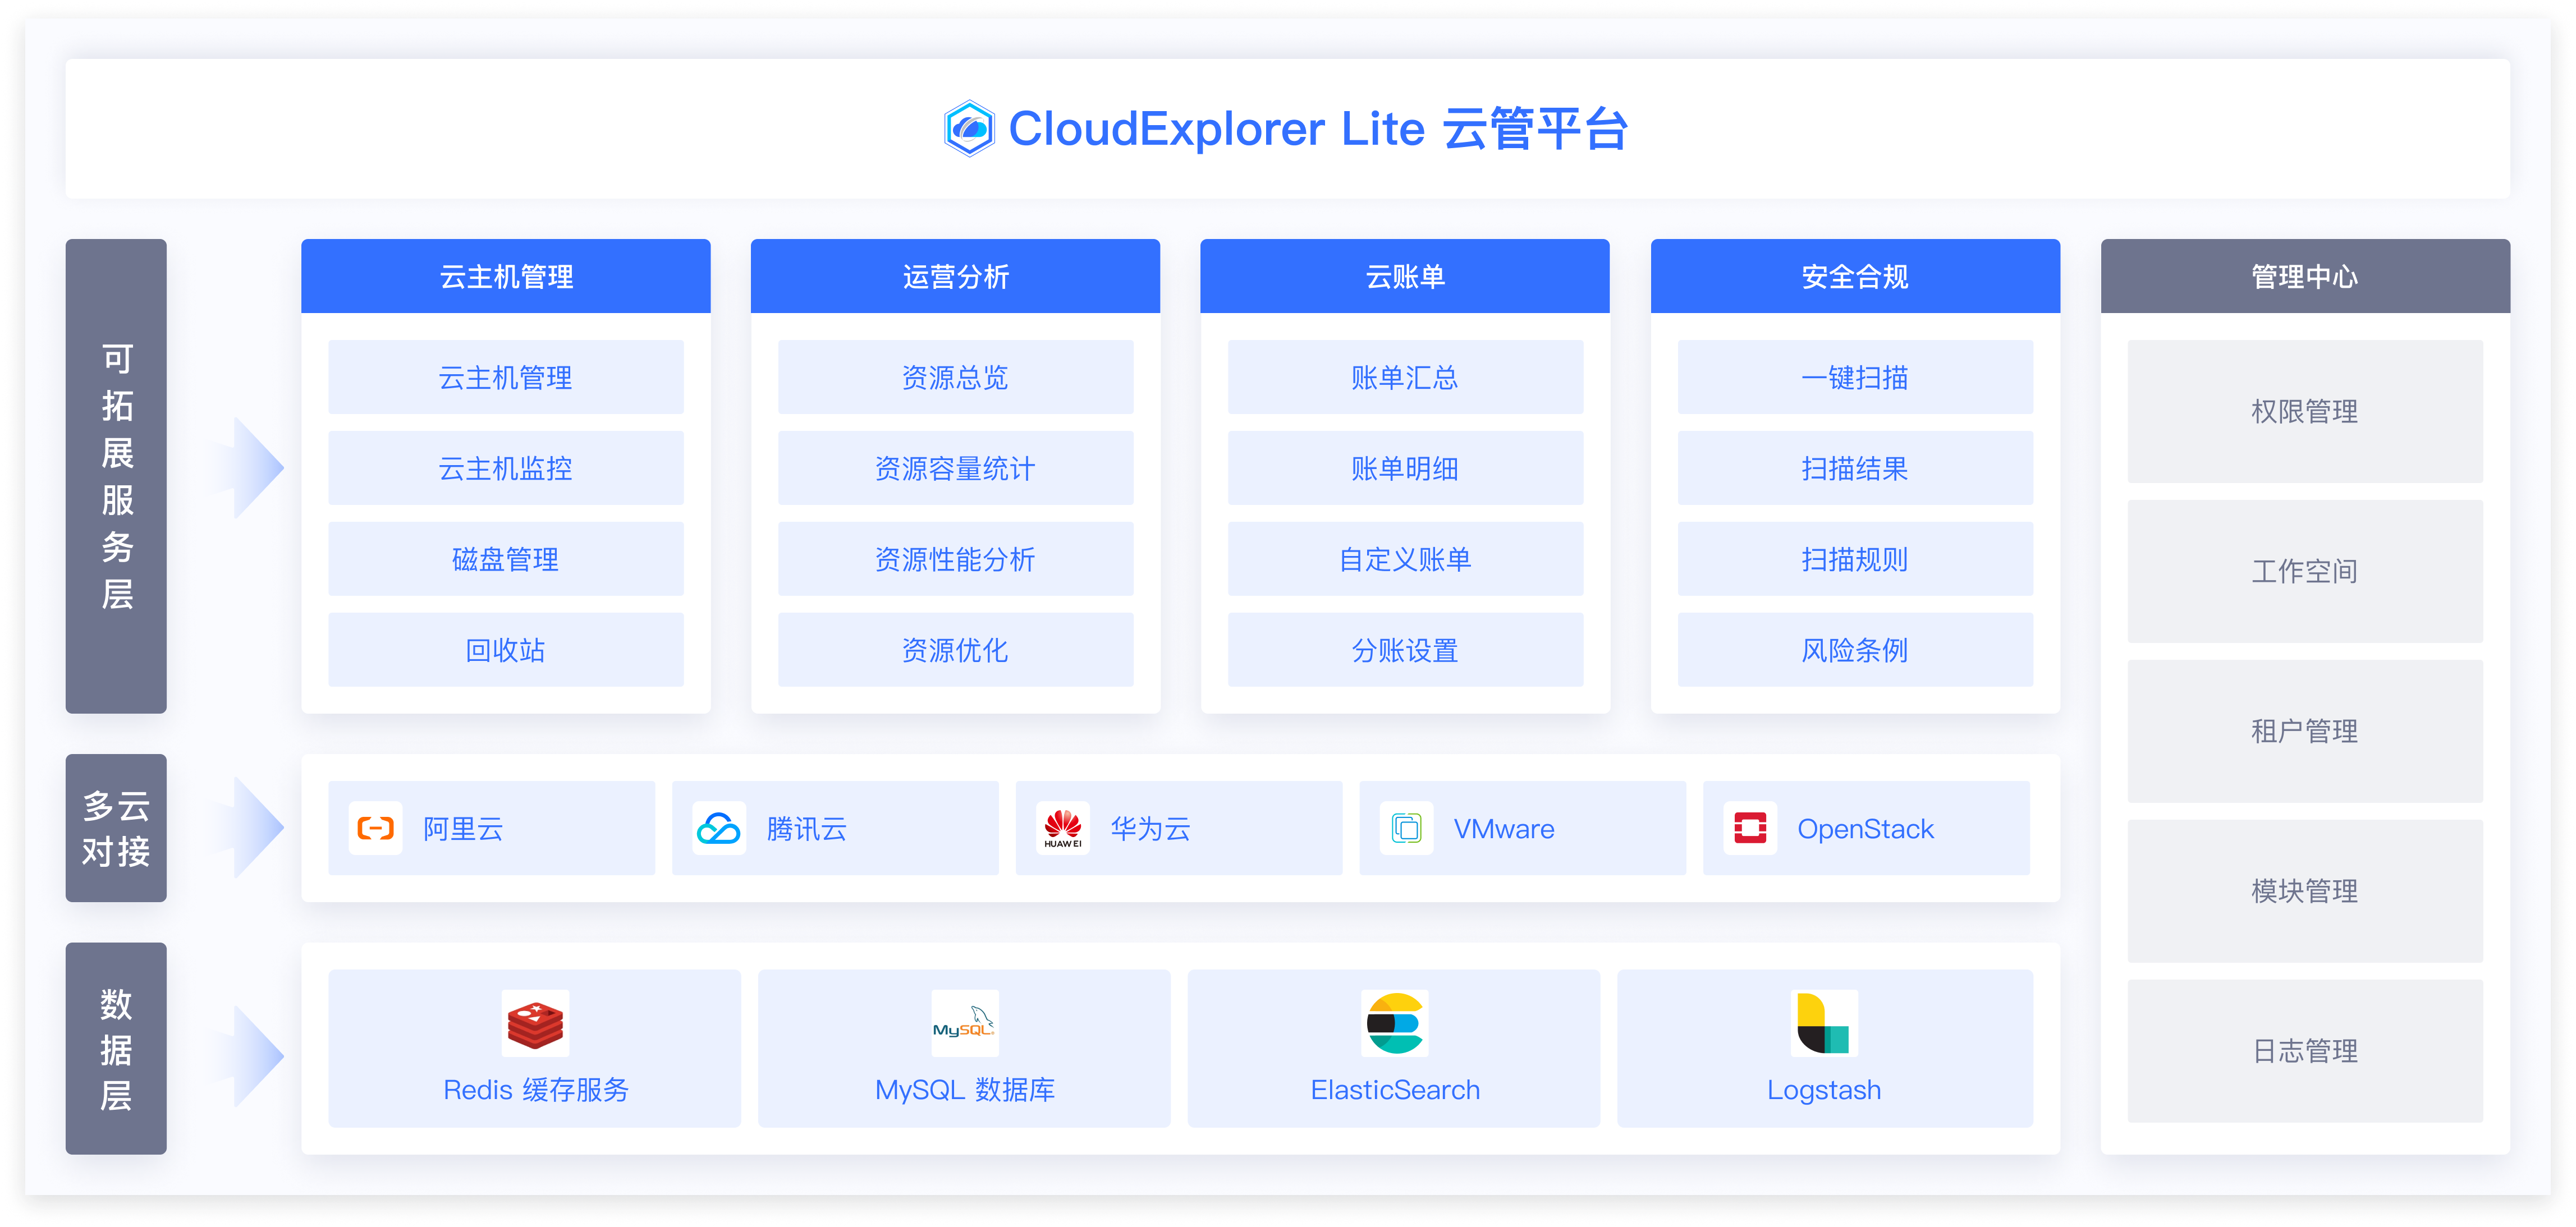 https://fit2cloud.com/cloudexplorer-lite/docs/img/systemarch/systemarch.png